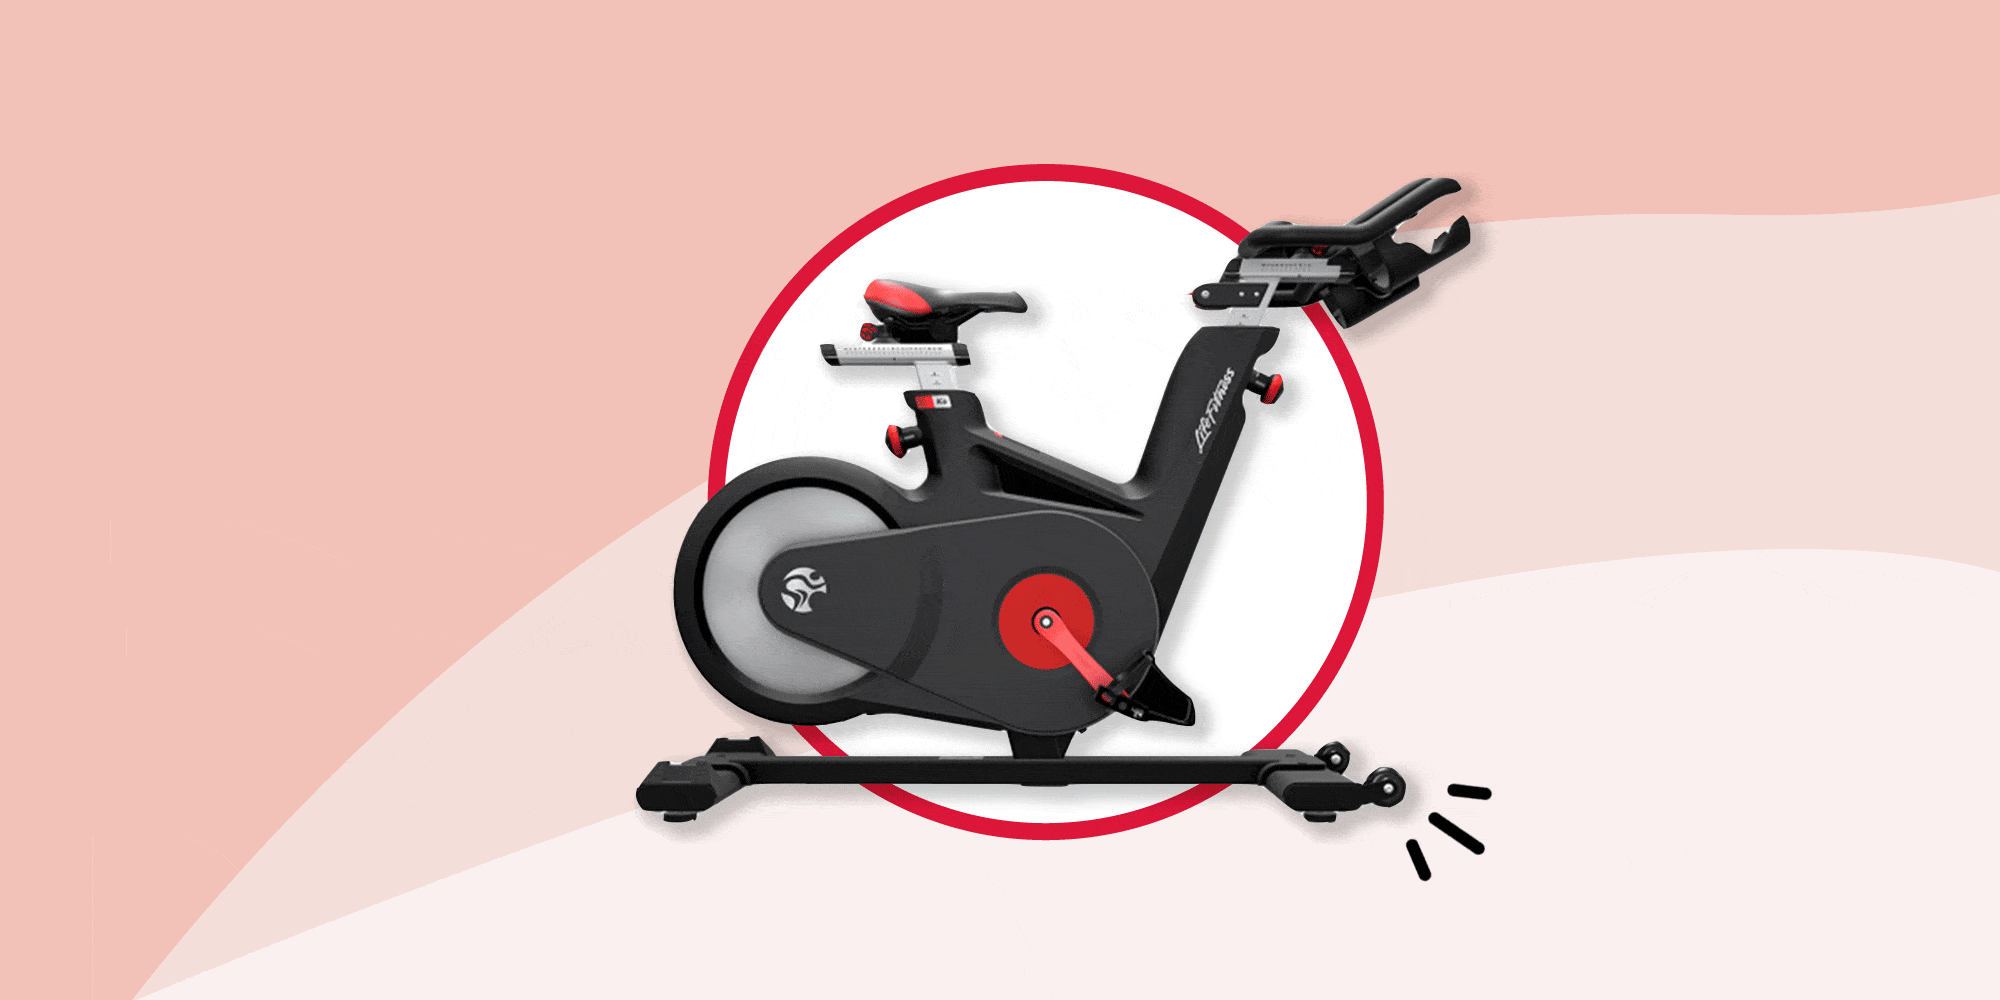 recommended exercise bike